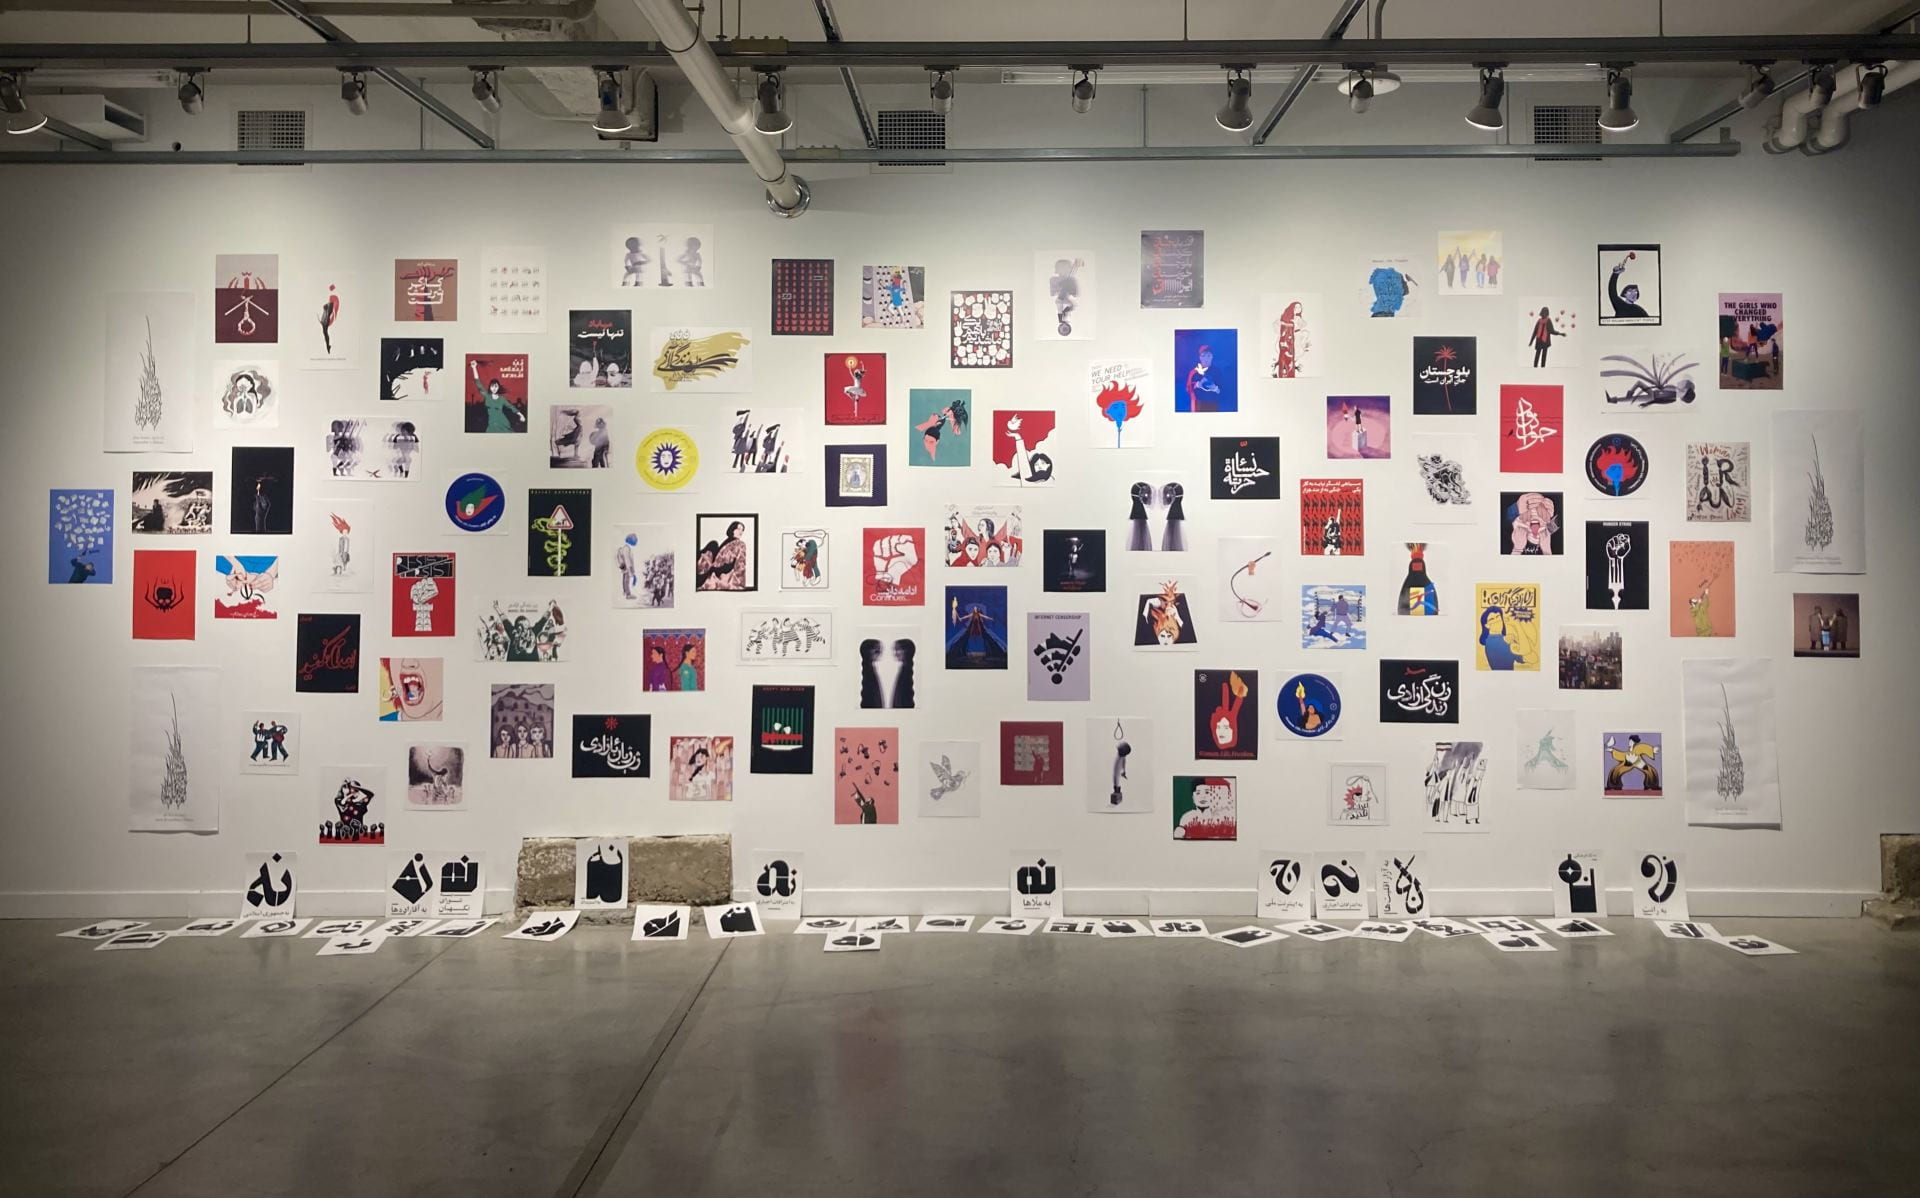 Posters designed by roughly 40 artists adorn a wall as part of the “Iran: Deciphering Violence and Resistance” exhibit, which is on show at the Urban Arts Space at the time of publication. Credit: Courtesy of Illya Mousavijad